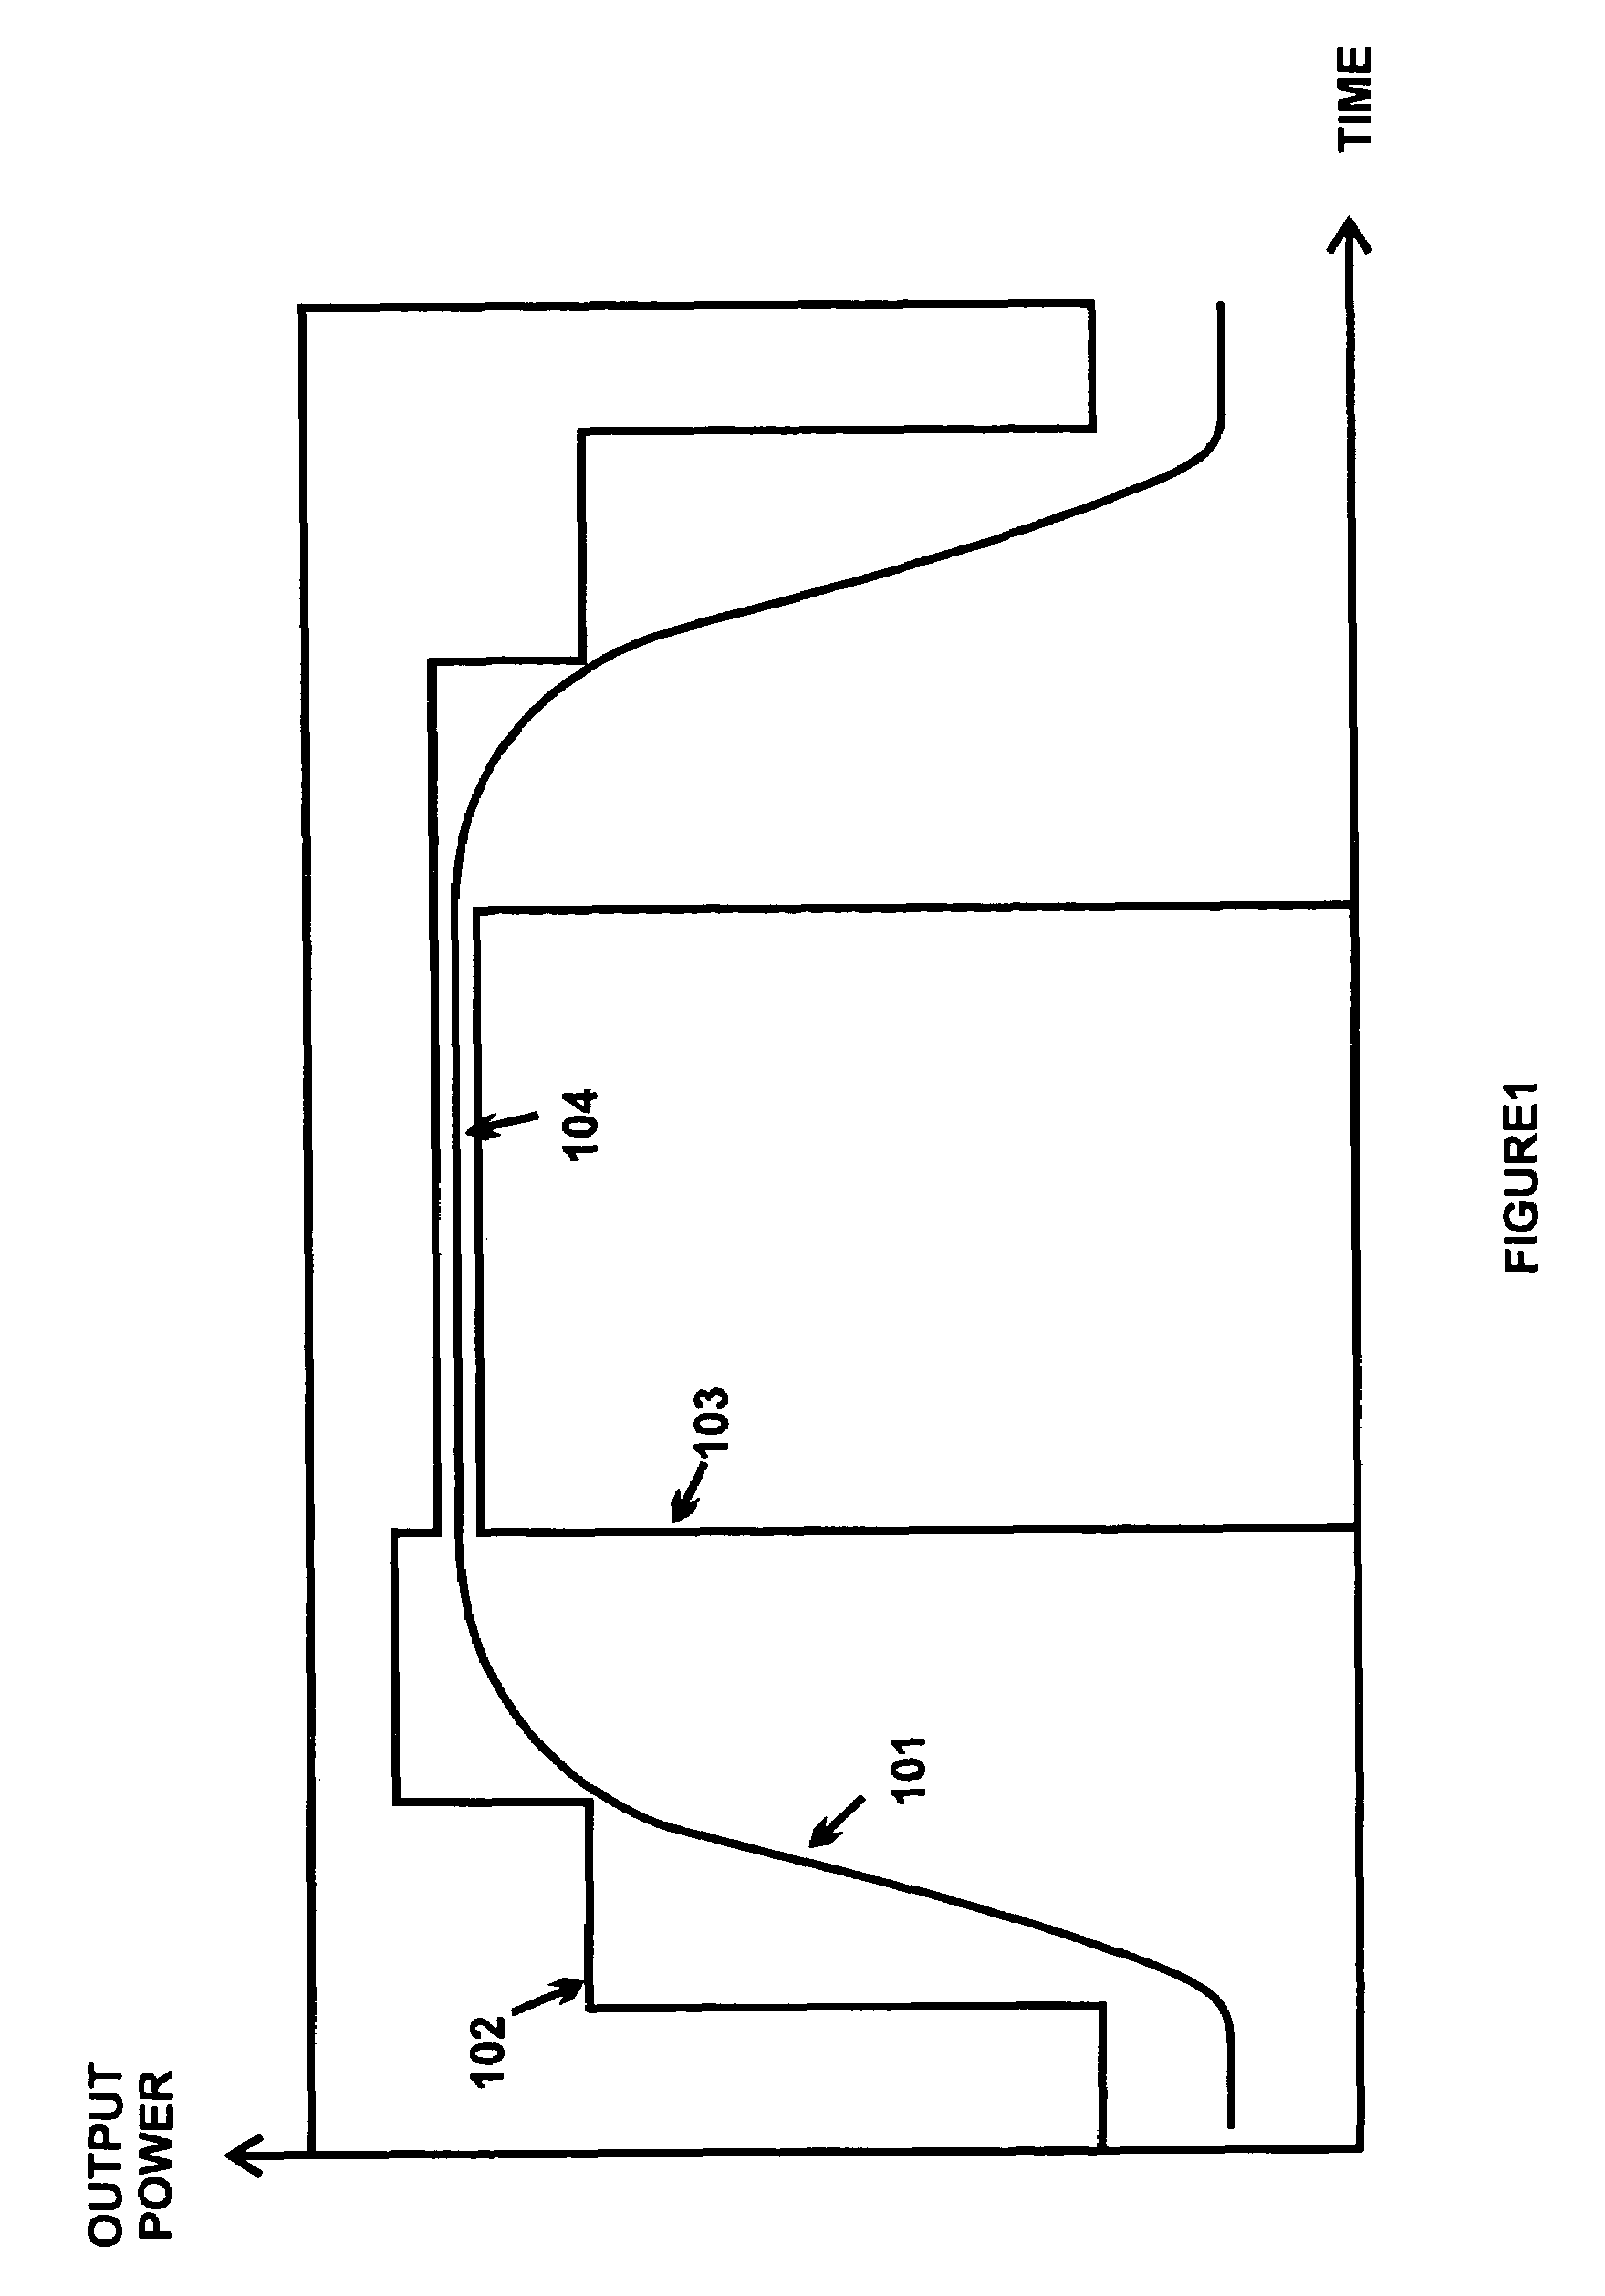 System and method for power amplifier output power control